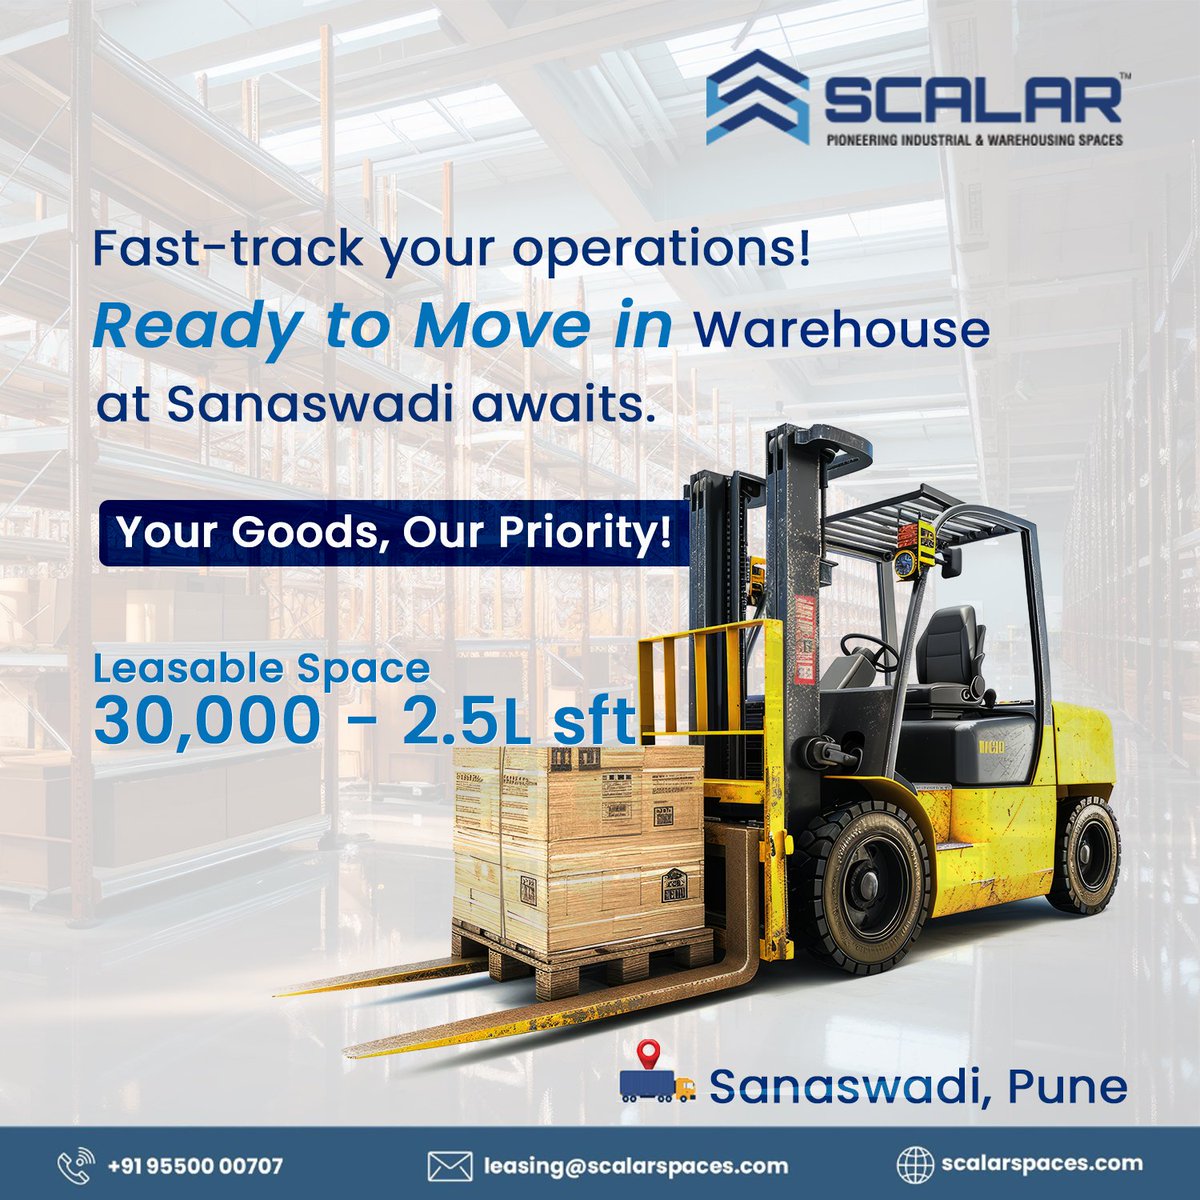 Say hello to seamless operations with our BTS Warehousing Solutions! Based in Sanaswadi, Pune, we prioritize your goods for smooth storage and efficient distribution. Let's elevate your business together!
.
#scalarspaces #warehouse #warehousingsolutions #WarehouseFacility #sm4dm